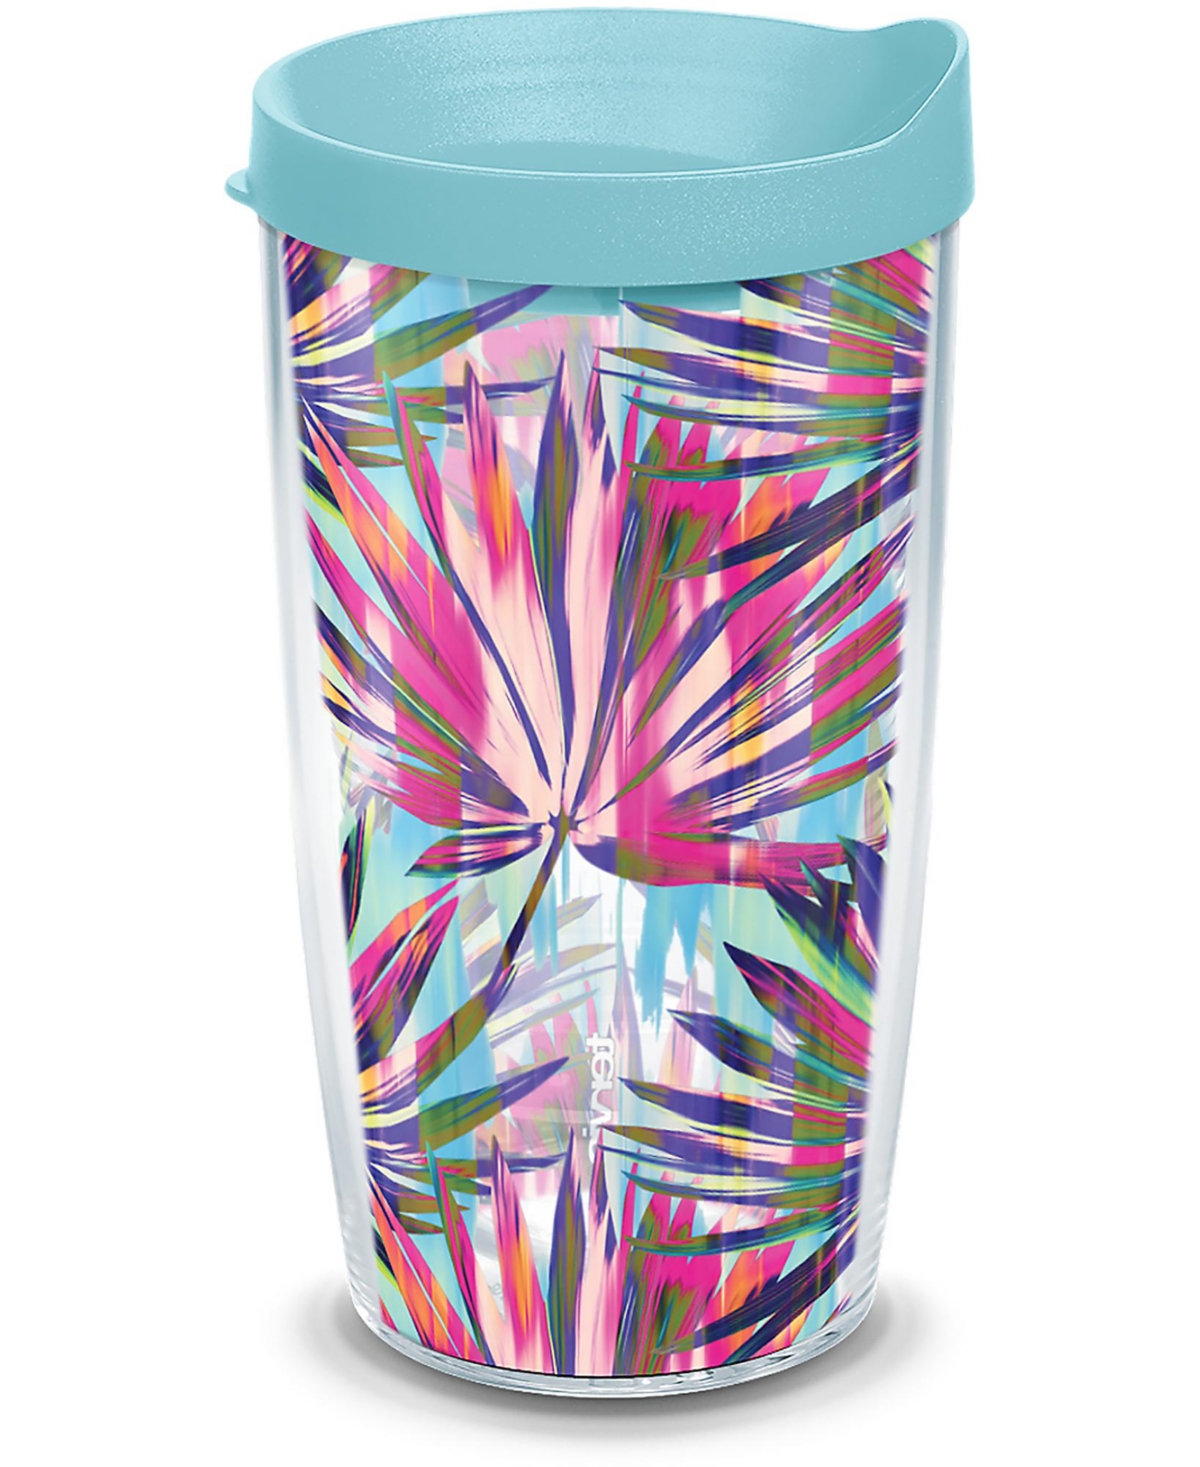 Tervis Tumbler Tervis Multi Color Palms Made In Usa Double Walled Insulated Tumbler Travel Cup Keeps Drinks Cold & In Open Miscellaneous